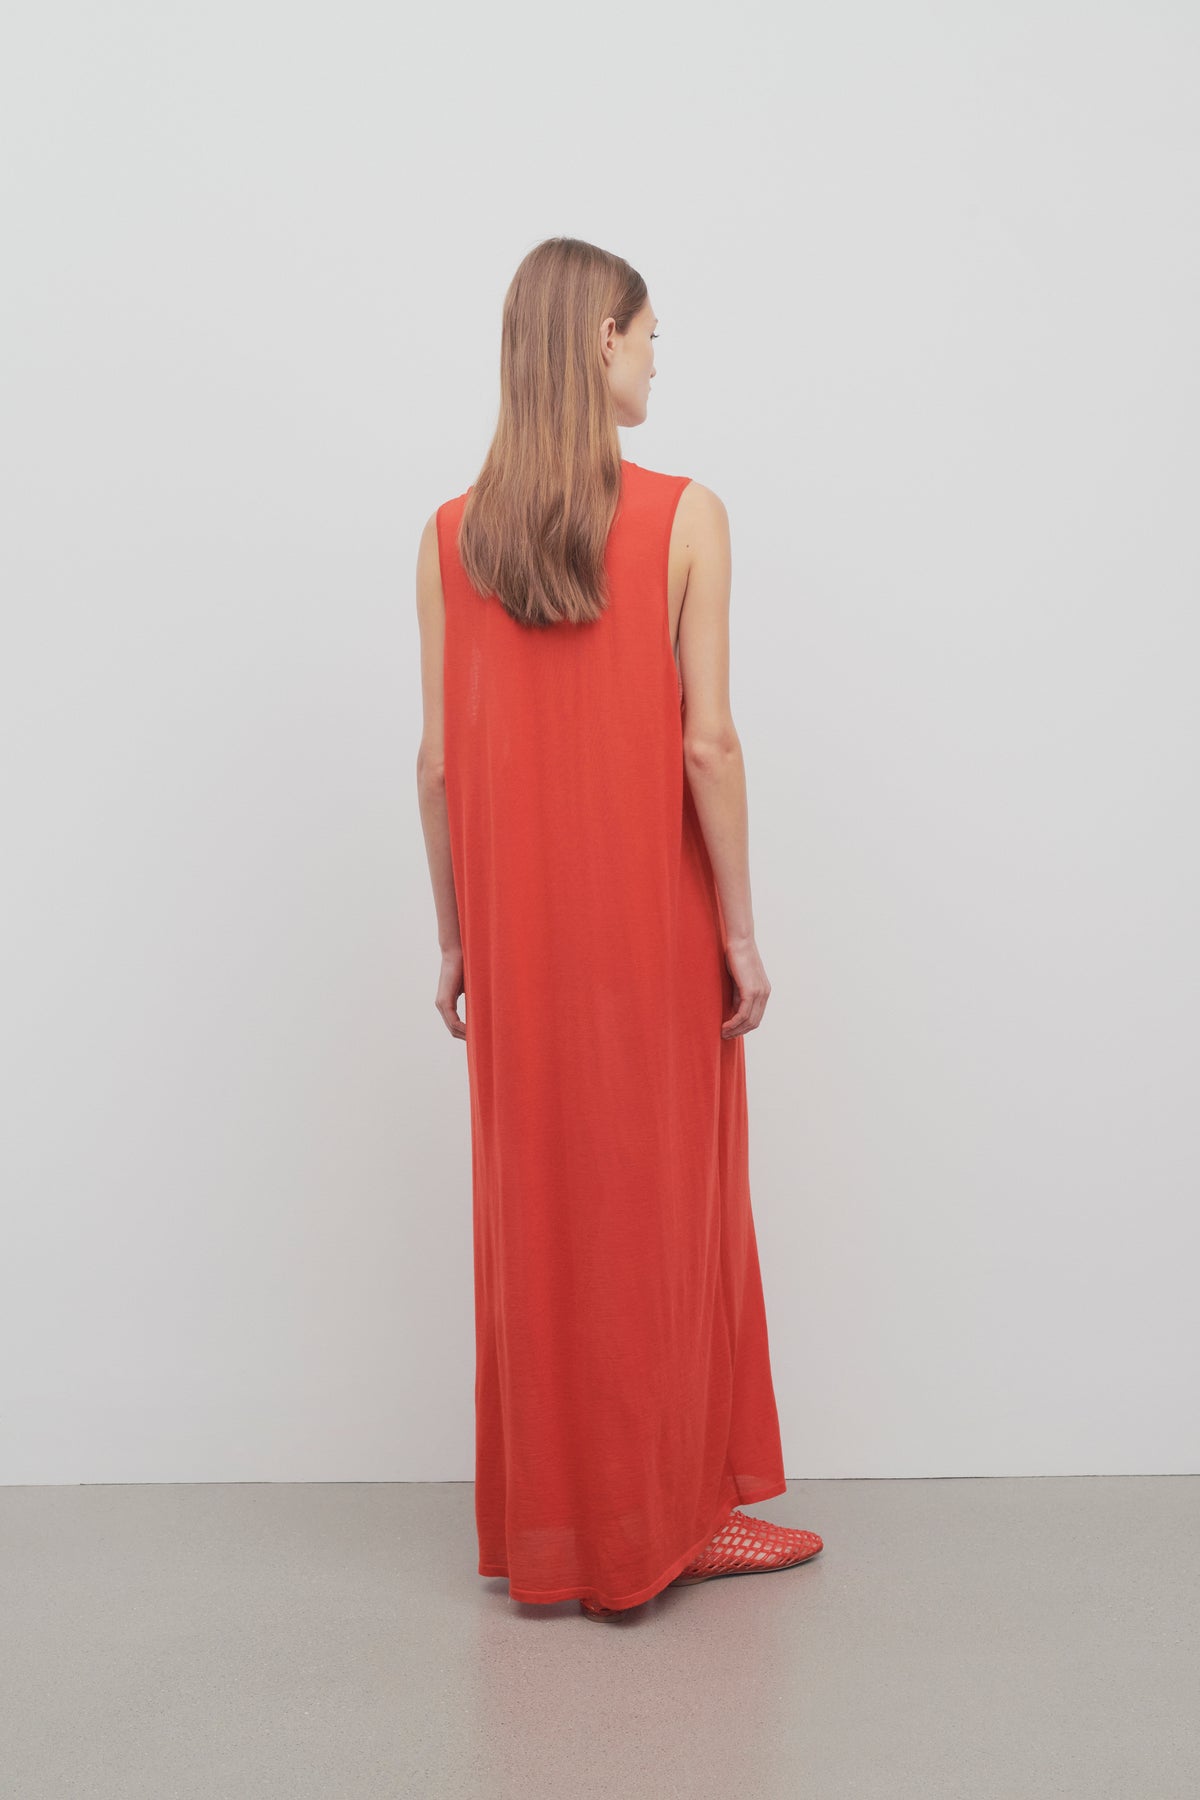 Gianna Dress in Cashmere